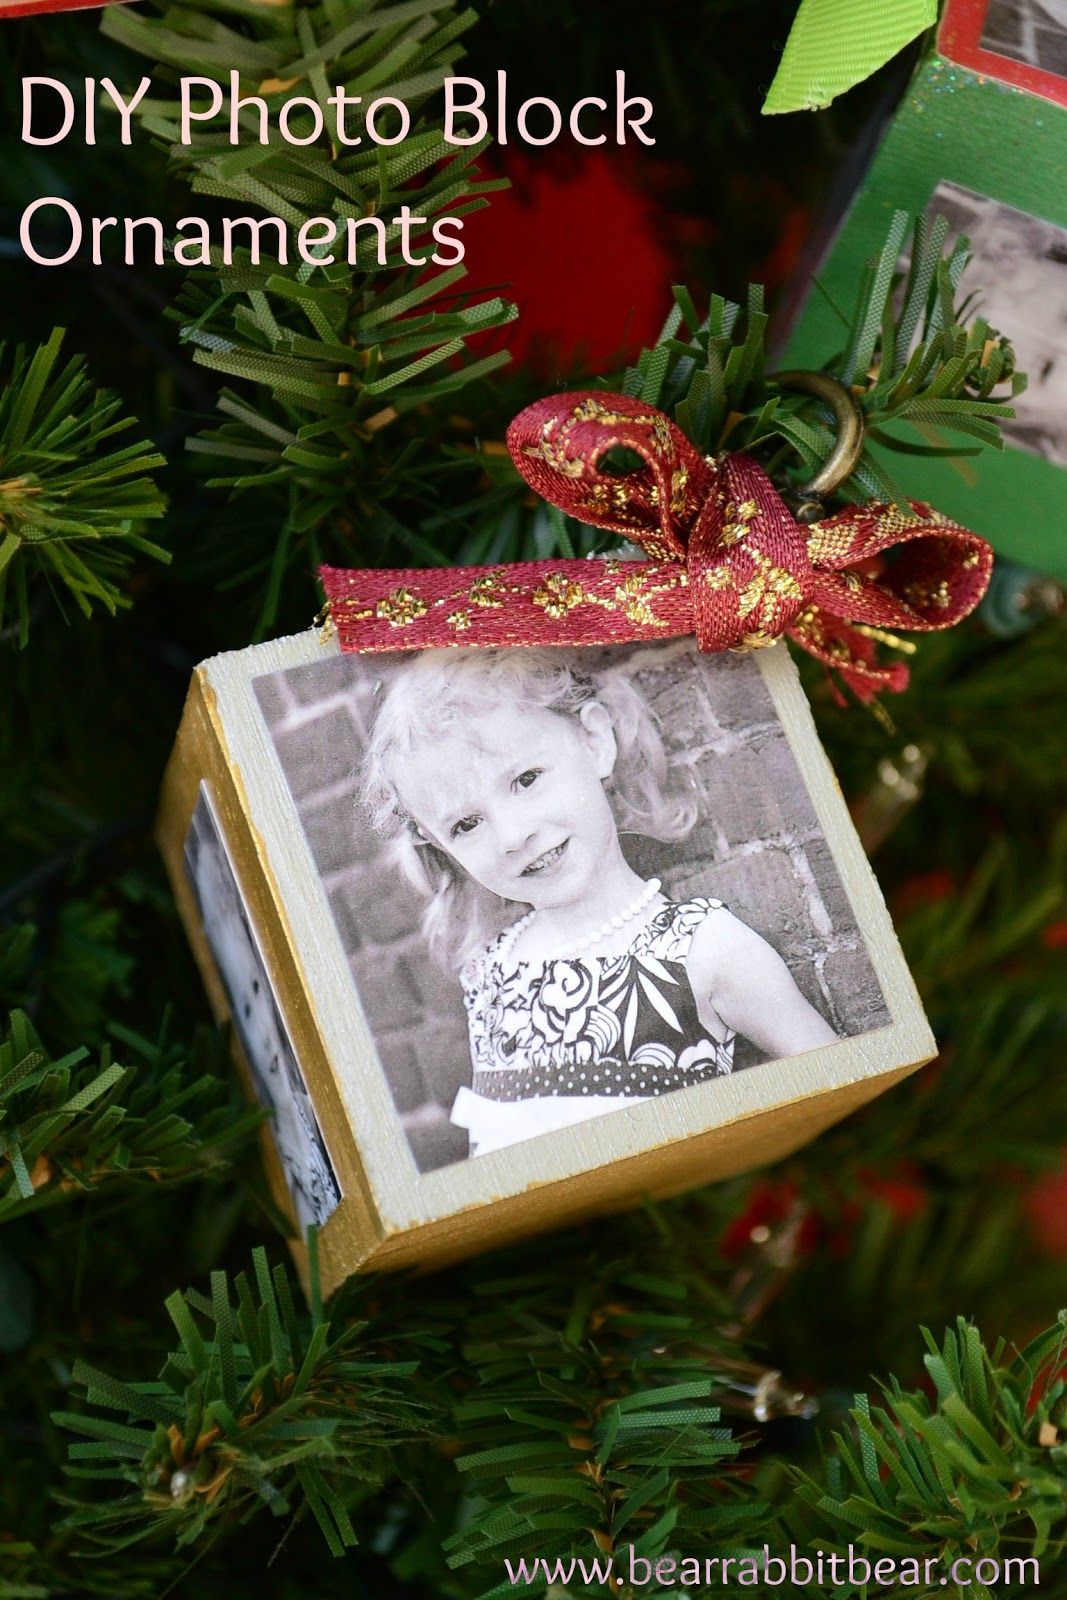 DIY Photo Block Ornaments with Mod Podge and Plaid Crafts